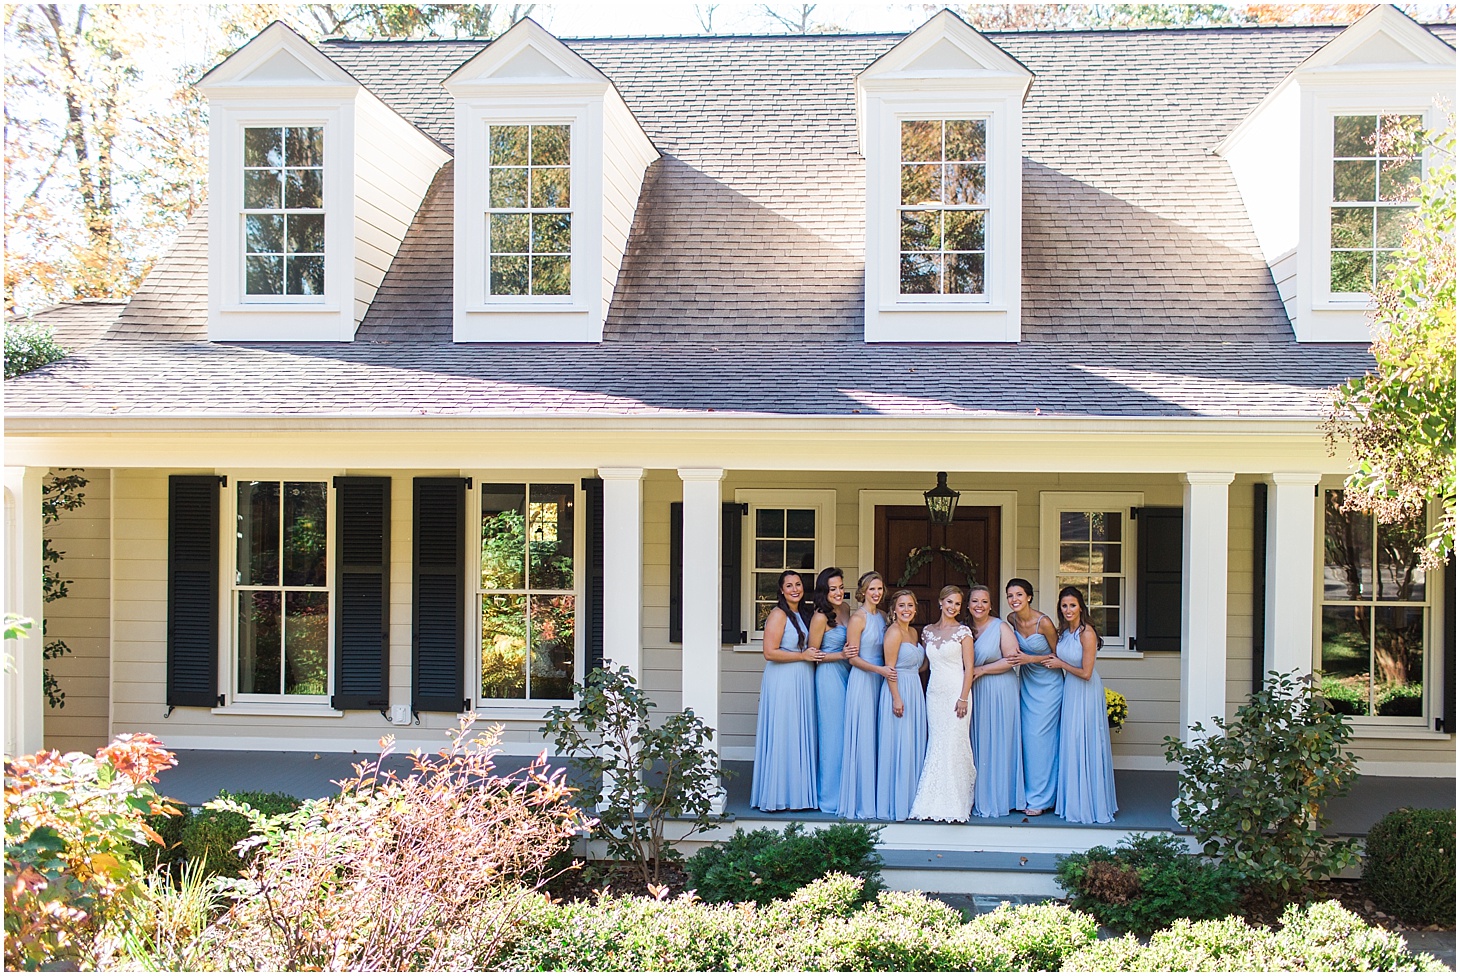 Bride and Bridesmaids Portrait | Wedding Ceremony at Old Presbyterian Meeting House | Southern Black Tie wedding at St. Regis DC in Dusty Blue and Ivory | Sarah Bradshaw Photography